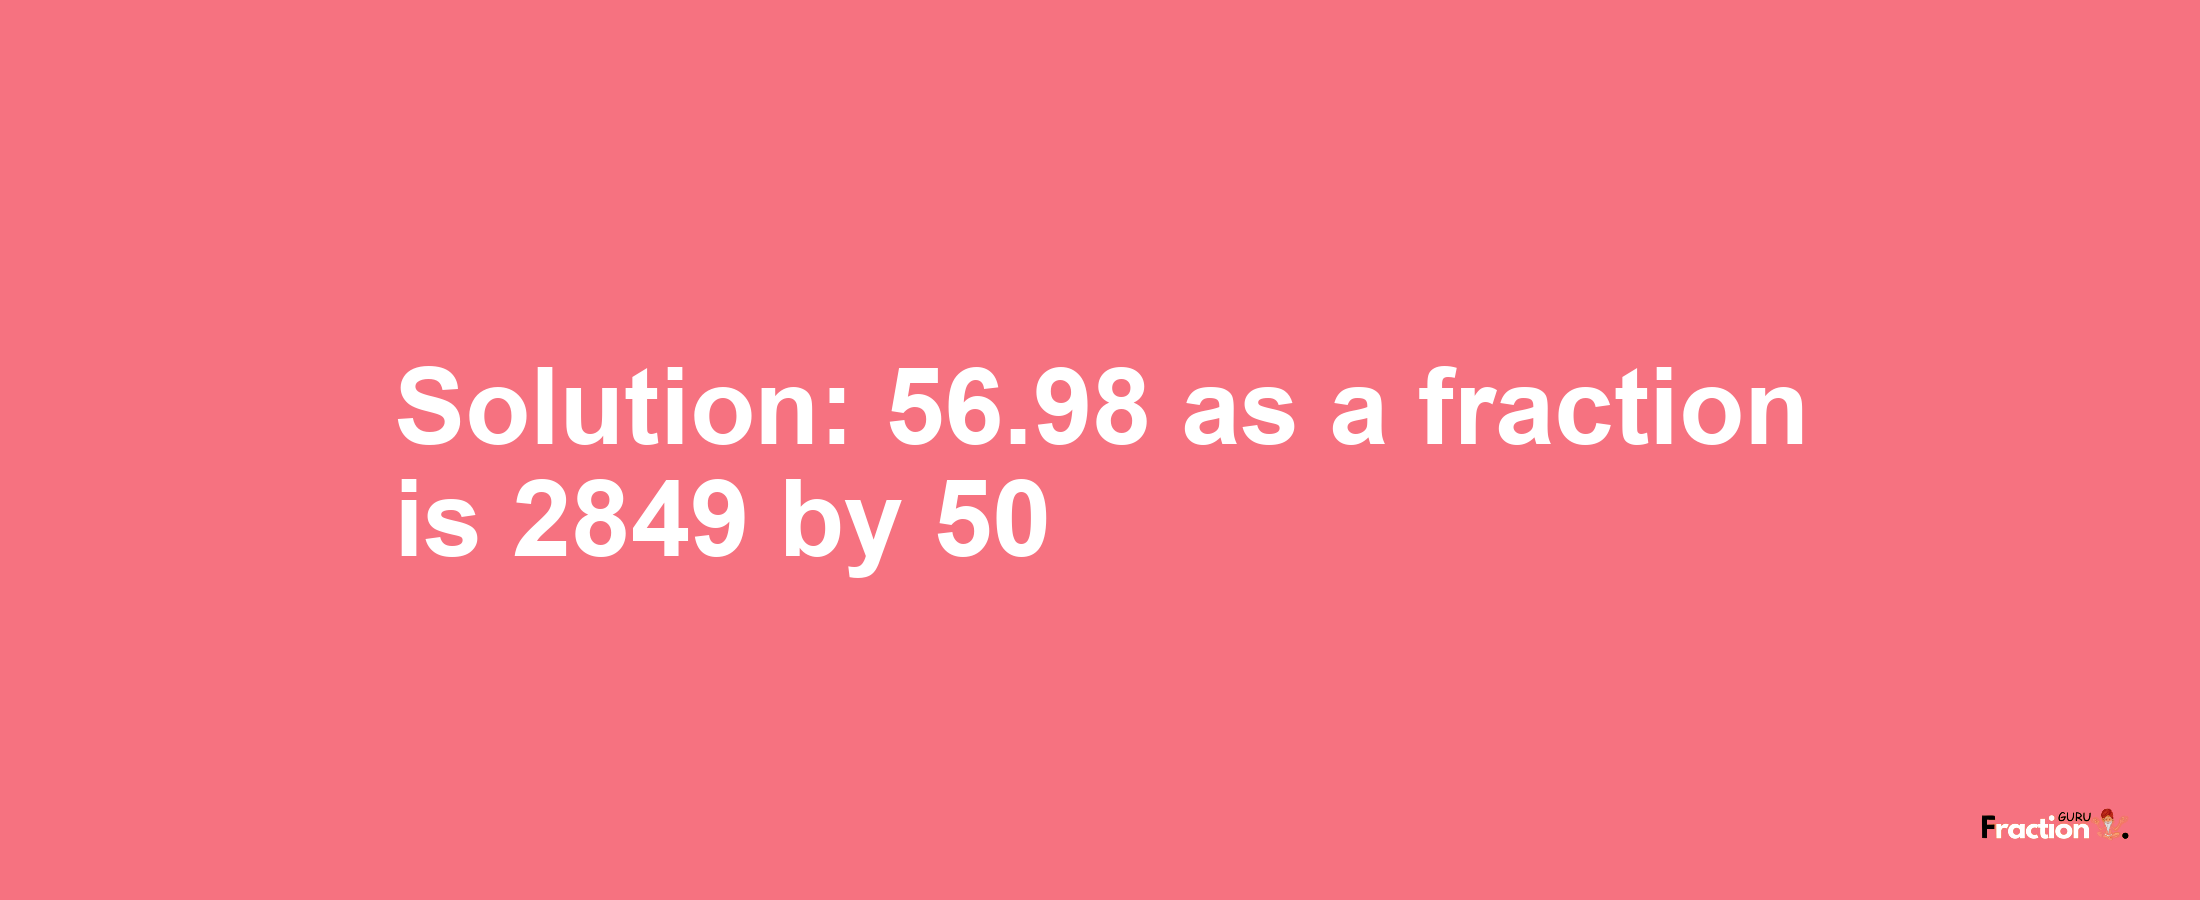 Solution:56.98 as a fraction is 2849/50